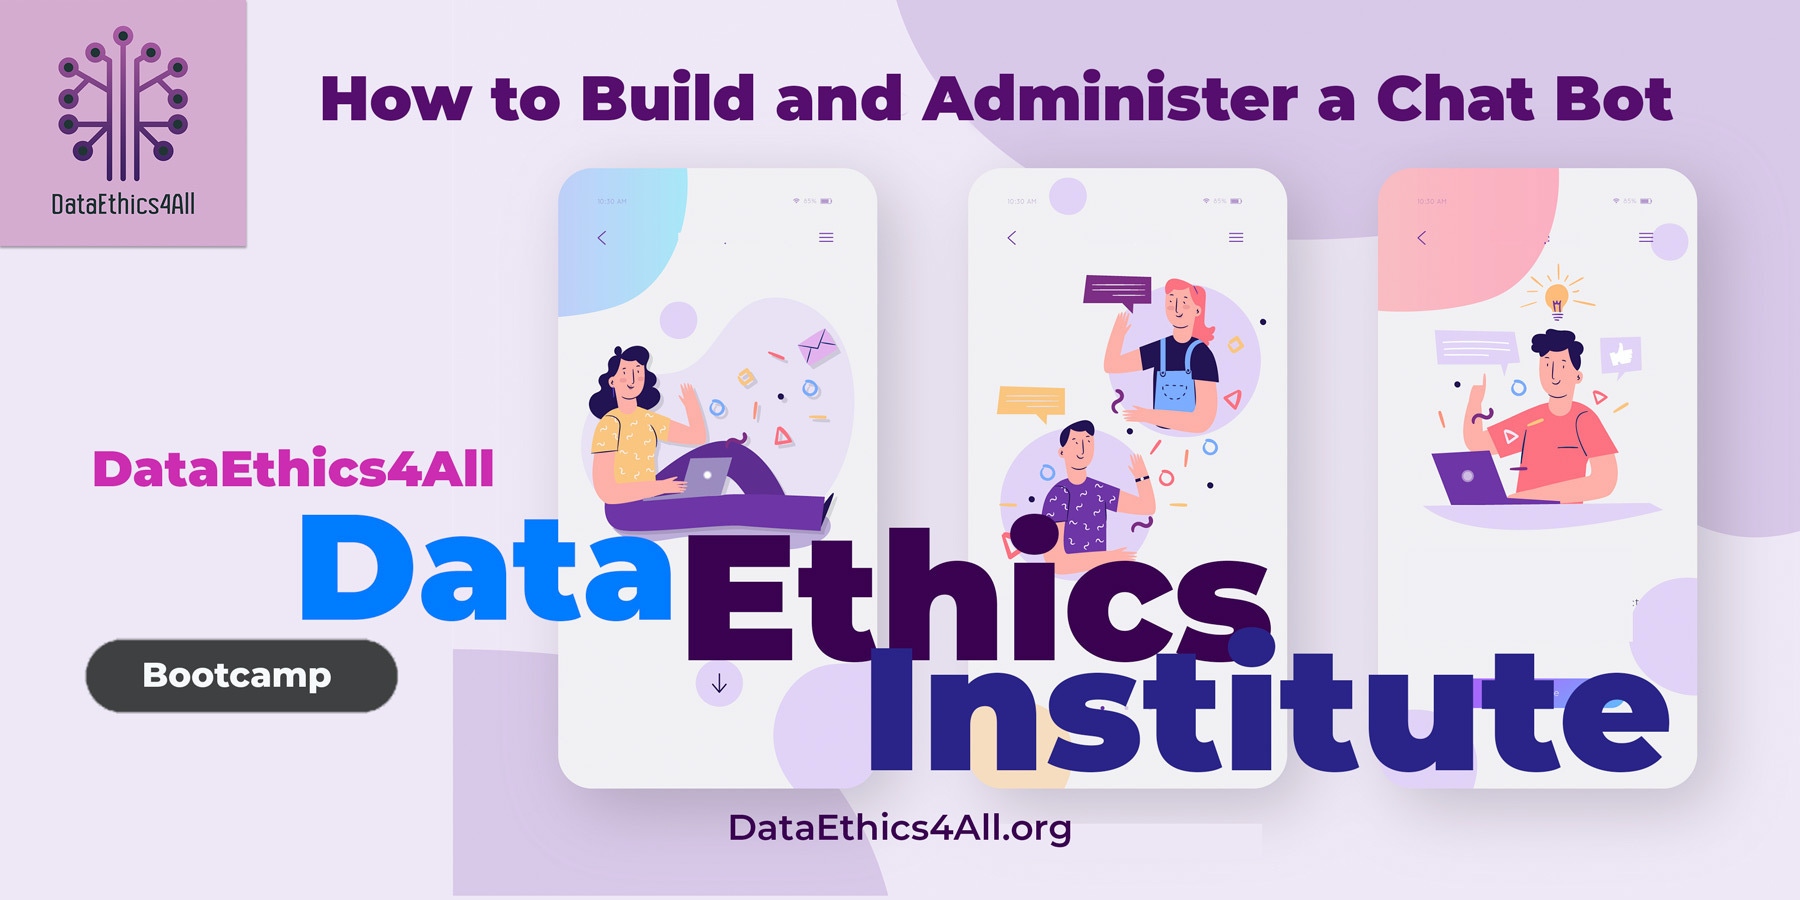 How-to-build-and-administer-a-Chat-bot-using-the-Socratic-questioning-method_DataEthics4All-Bootcamp-Master-Class_Data-Ethics-Institute